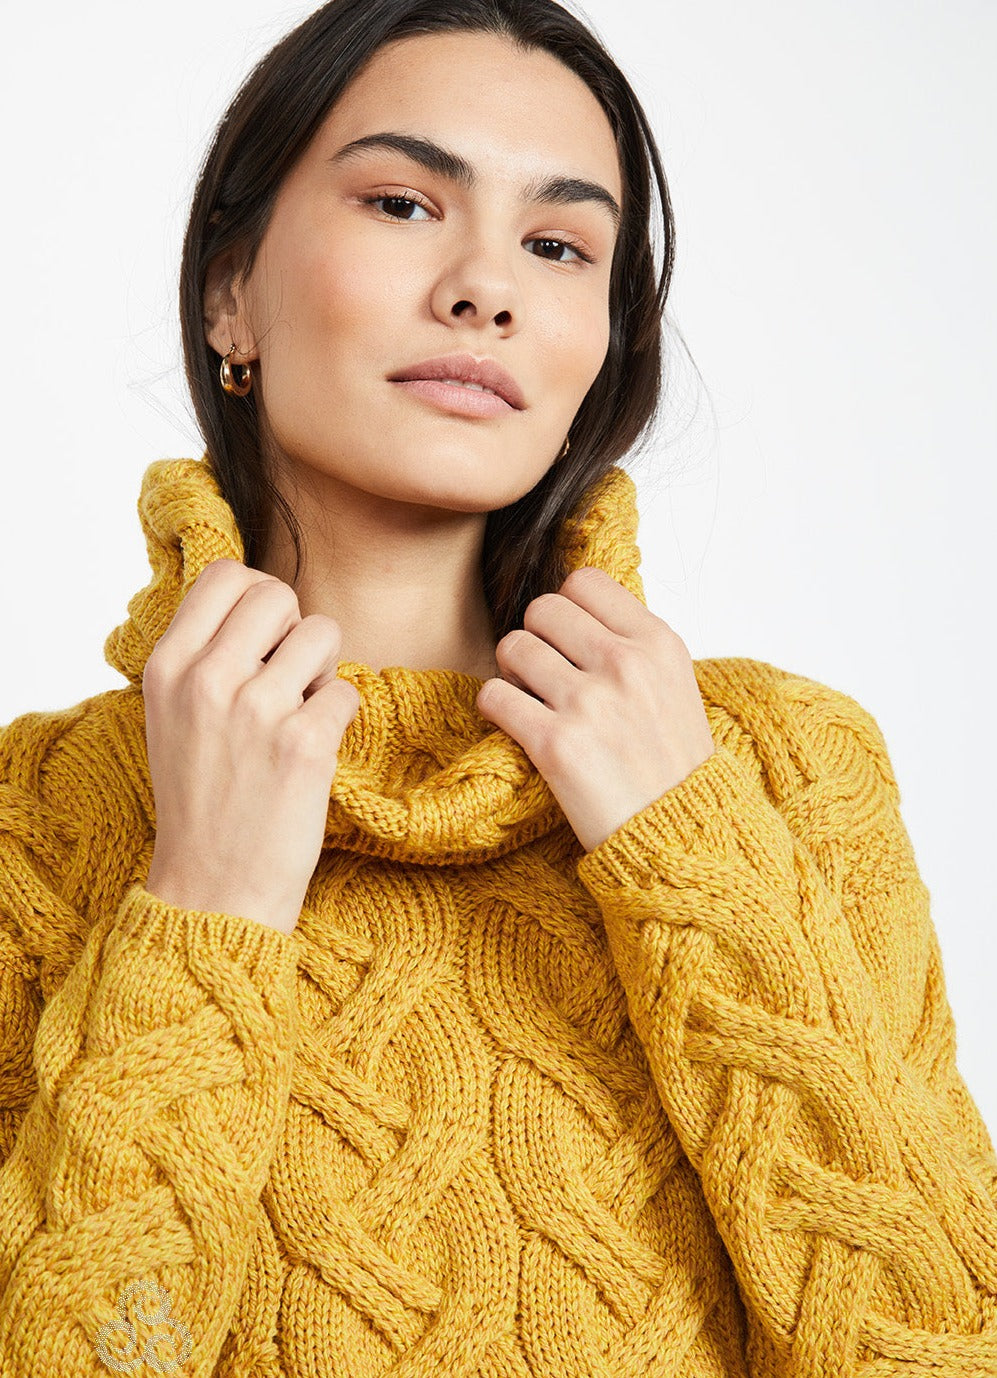 Irish - Cable Knit sweater with Cowl Neck - Yellow